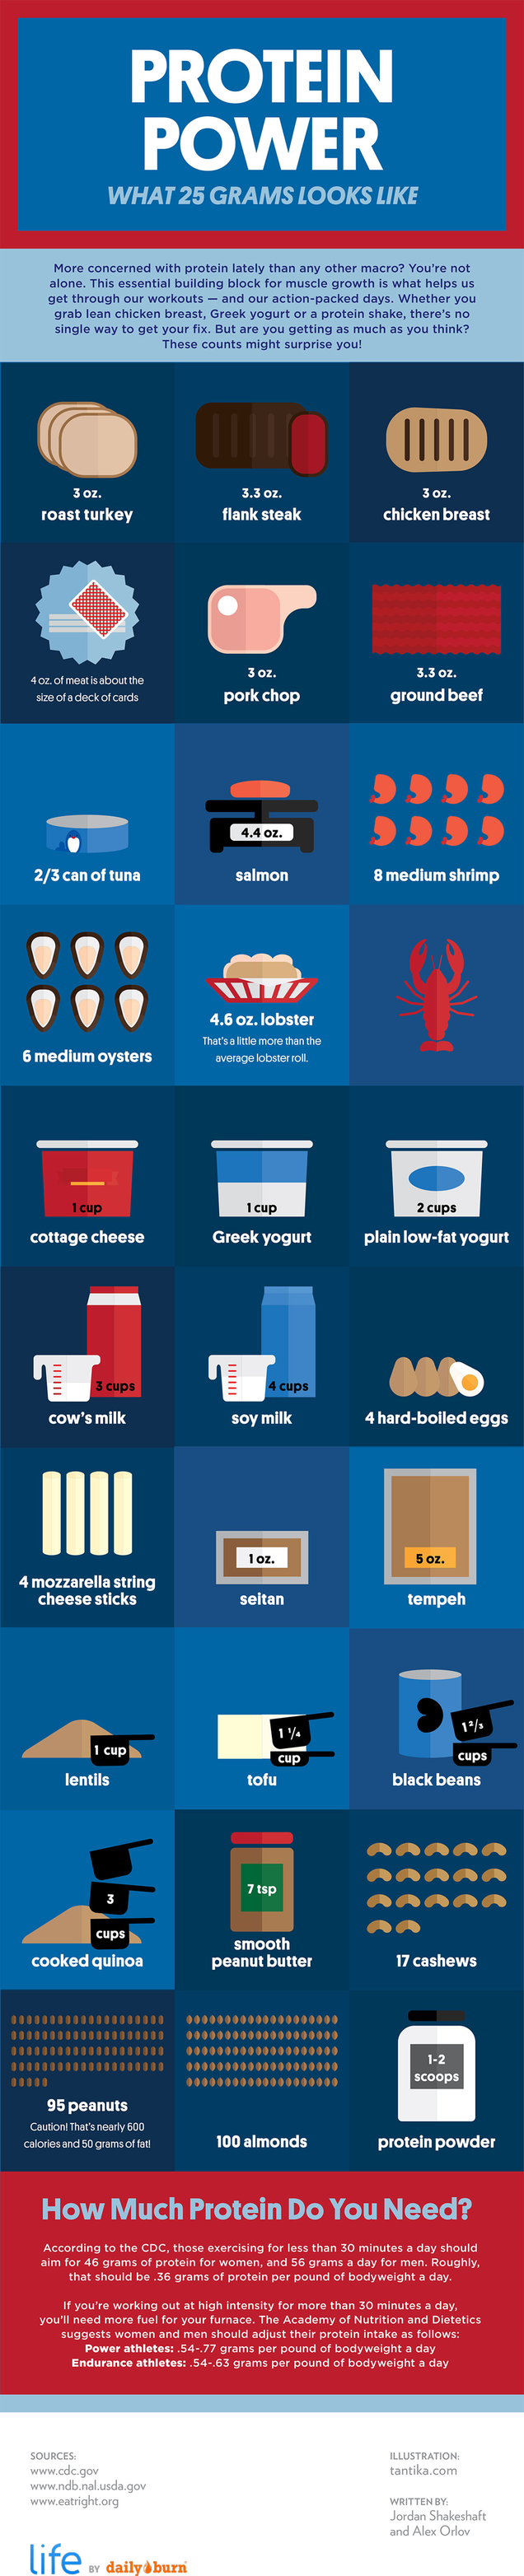 This Infographic Shows What 25 Grams of Protein Looks Like